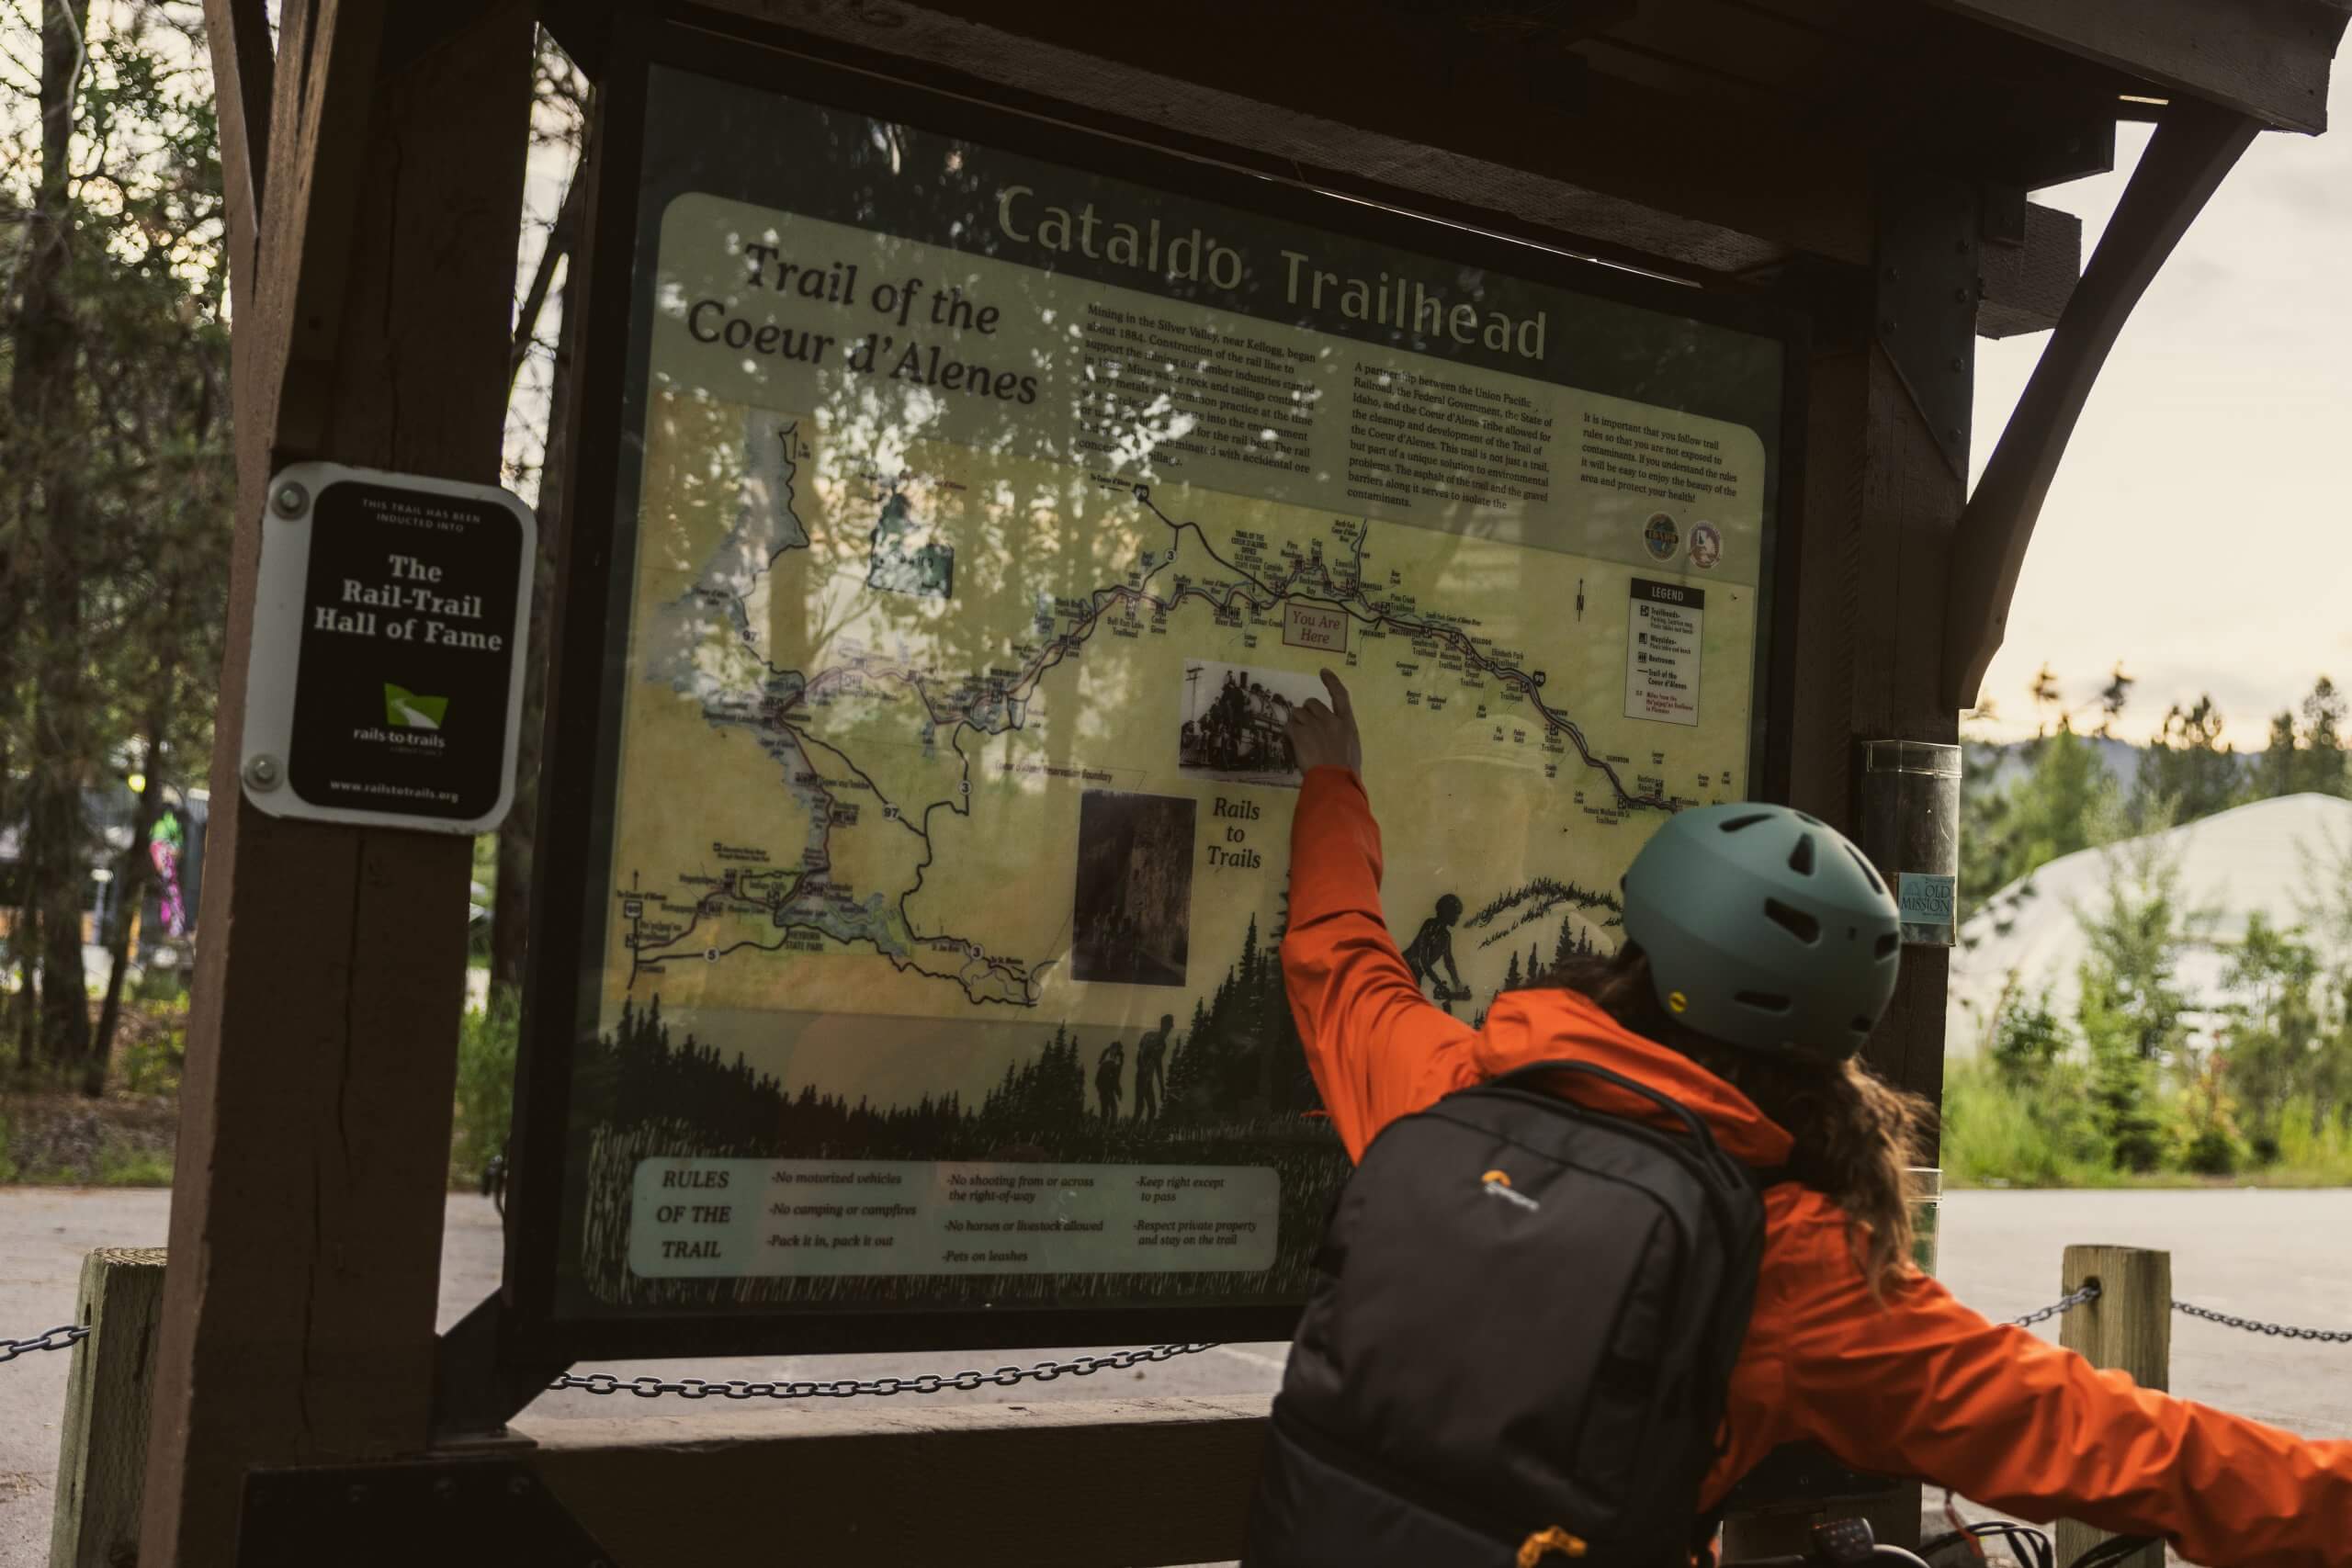 A rider points at a sign displaying a map of the Cataldo Trailhead, located at the trailhead.